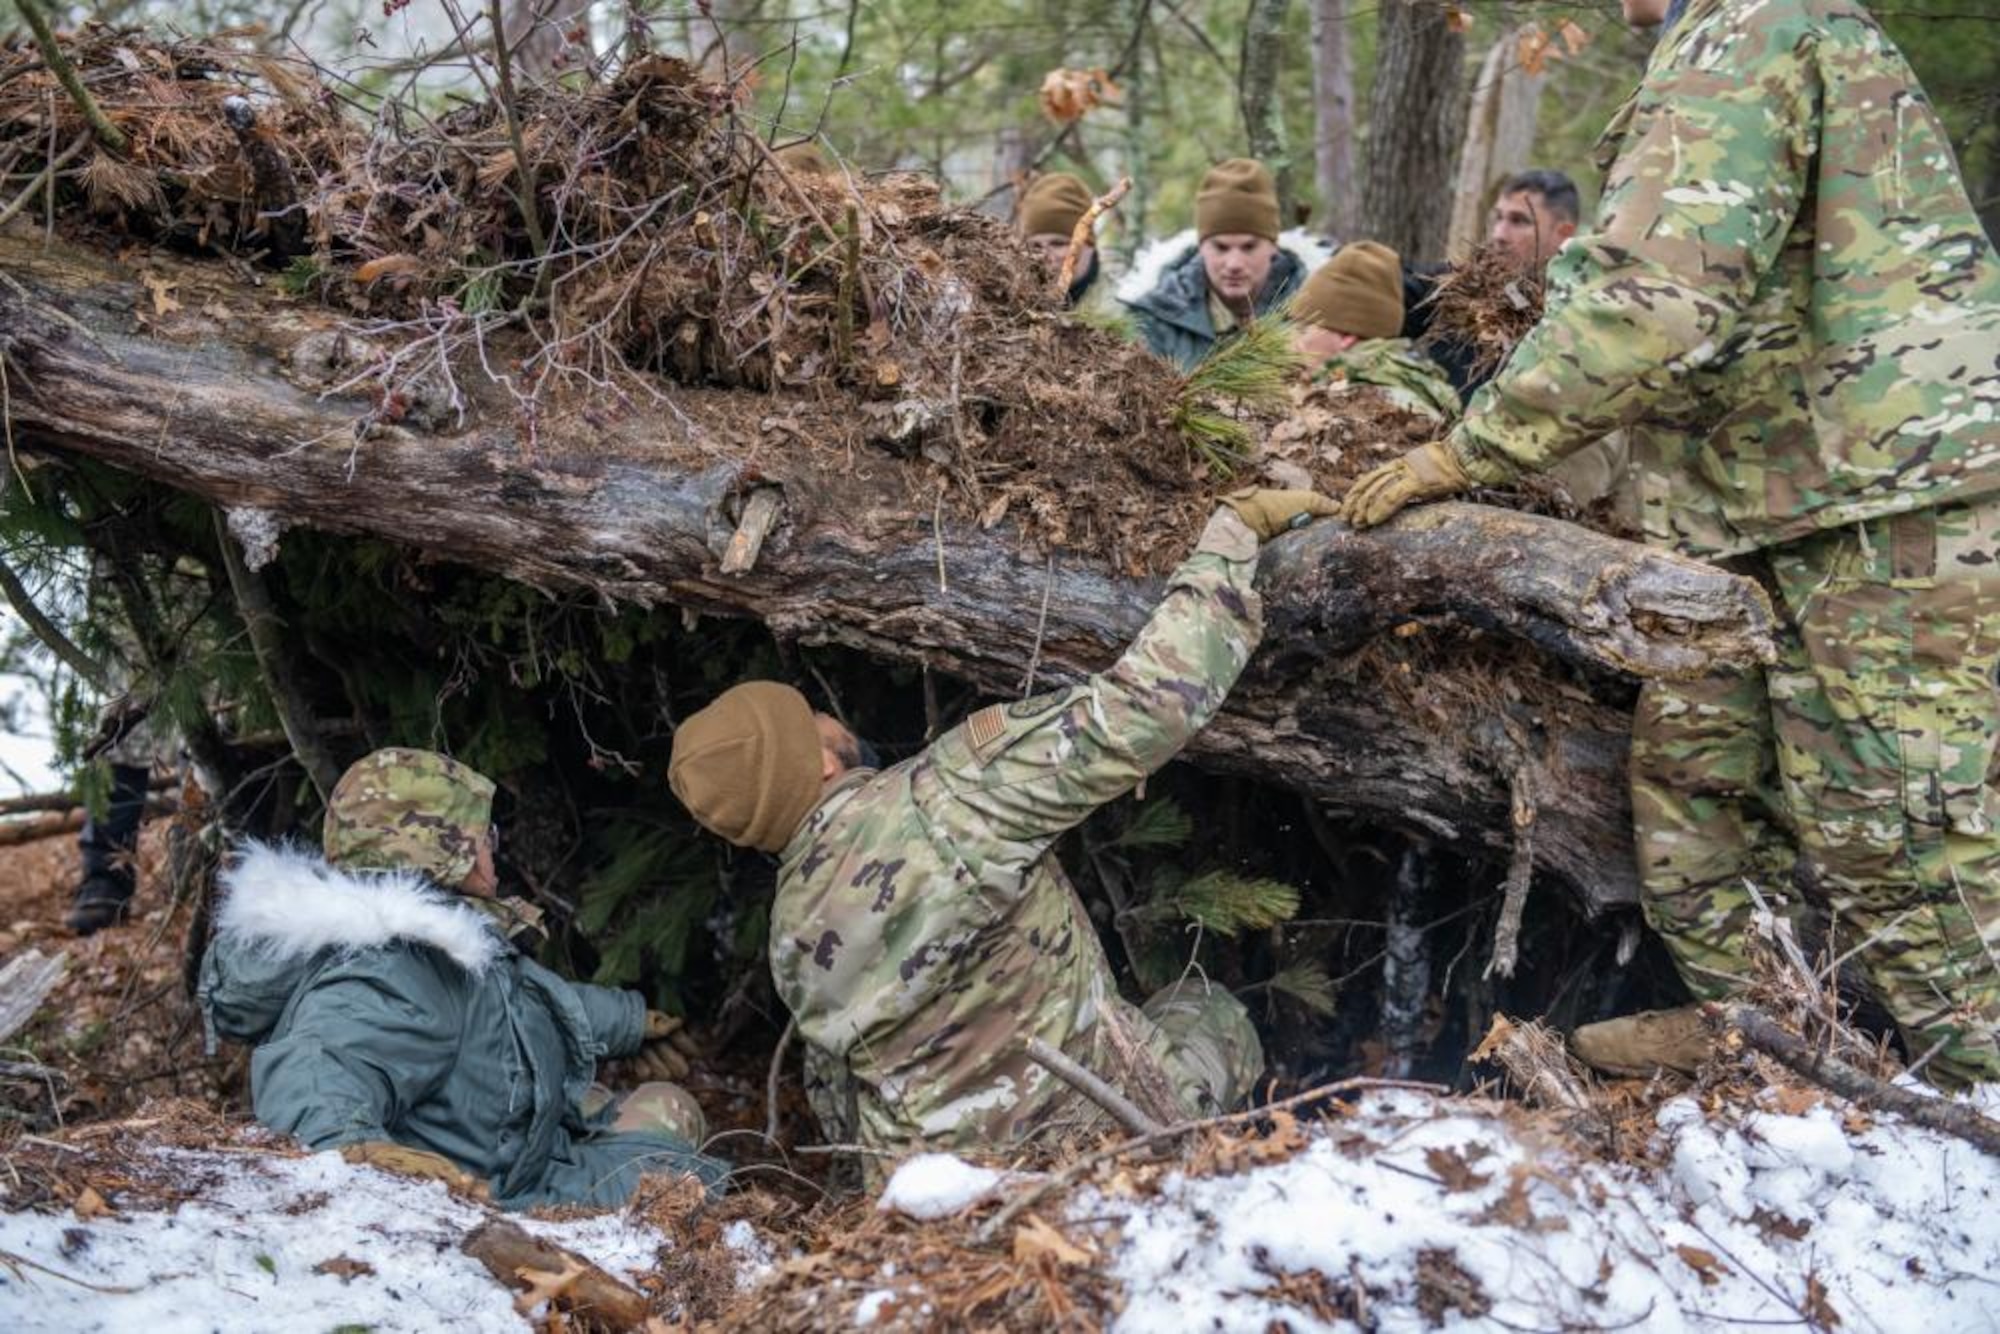 U.S. Air Force Airmen of the 290th Joint Communications Support Squadron assemble a natural shelter Feb. 9, 2023, at Alpena Combat Readiness Training Center, Michigan. The Airmen are attending a class led by Survival, Evasion, Resistance and Escape(SERE) specialists to teach them basic survival techniques in a cold weather environment. (U.S. Air National Guard photo by Senior Airman Jesse Hanson)